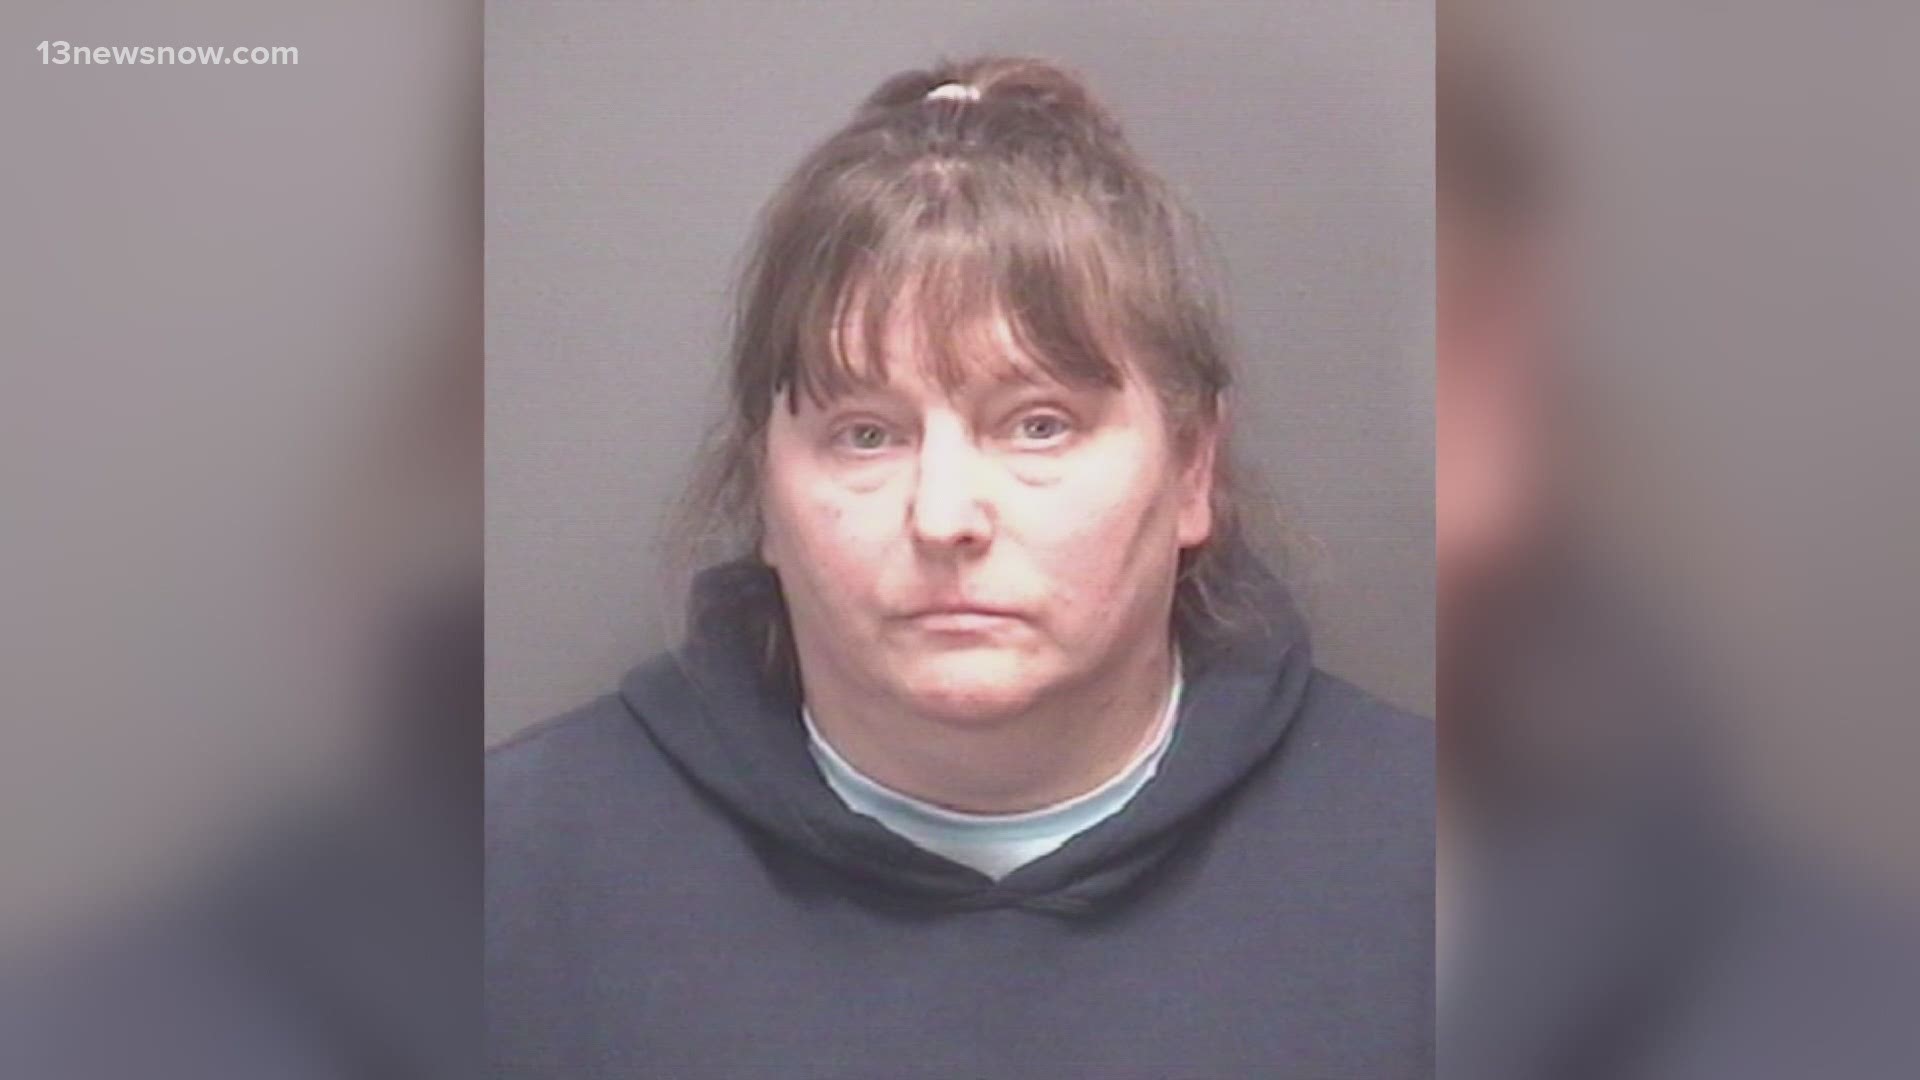 Police said that Tiffany Antonucci forced the boys to sleep outside in a tent as punishment, regardless of the weather. She's facing 15 child neglect charges.